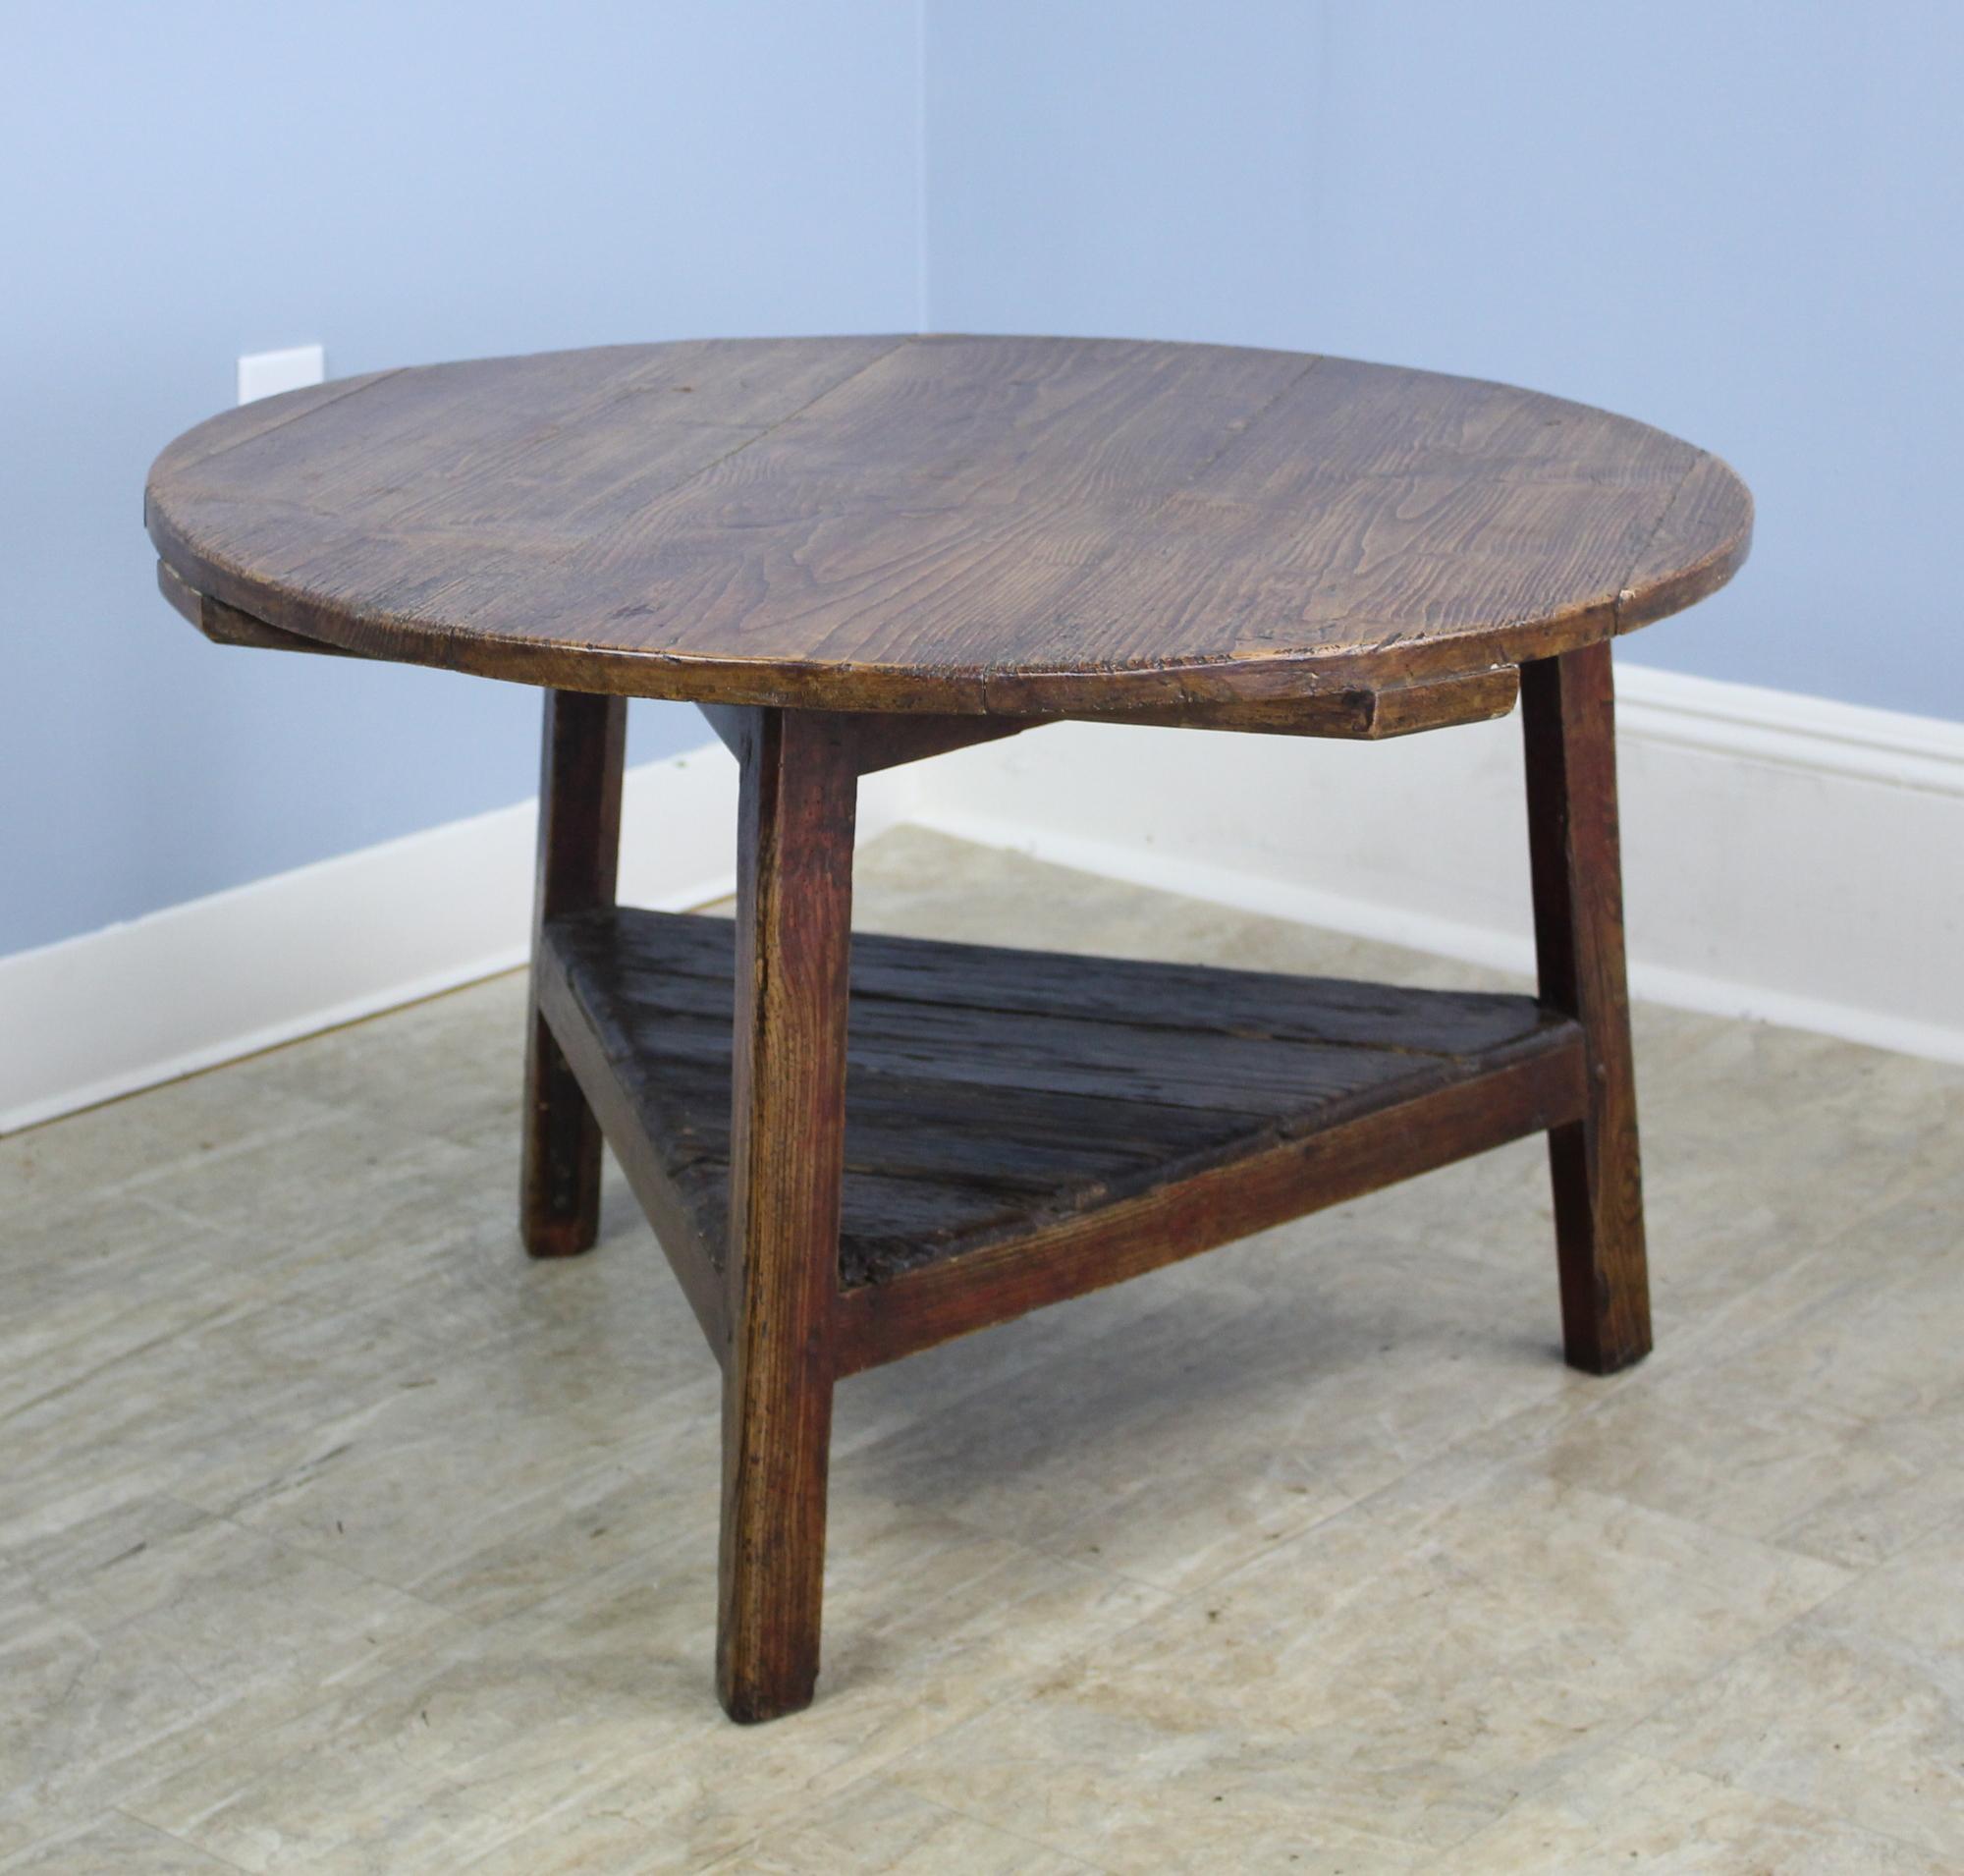 A Classic Welsh tripod based cricket table, with pine top and ash base, cut down to coffee table height.